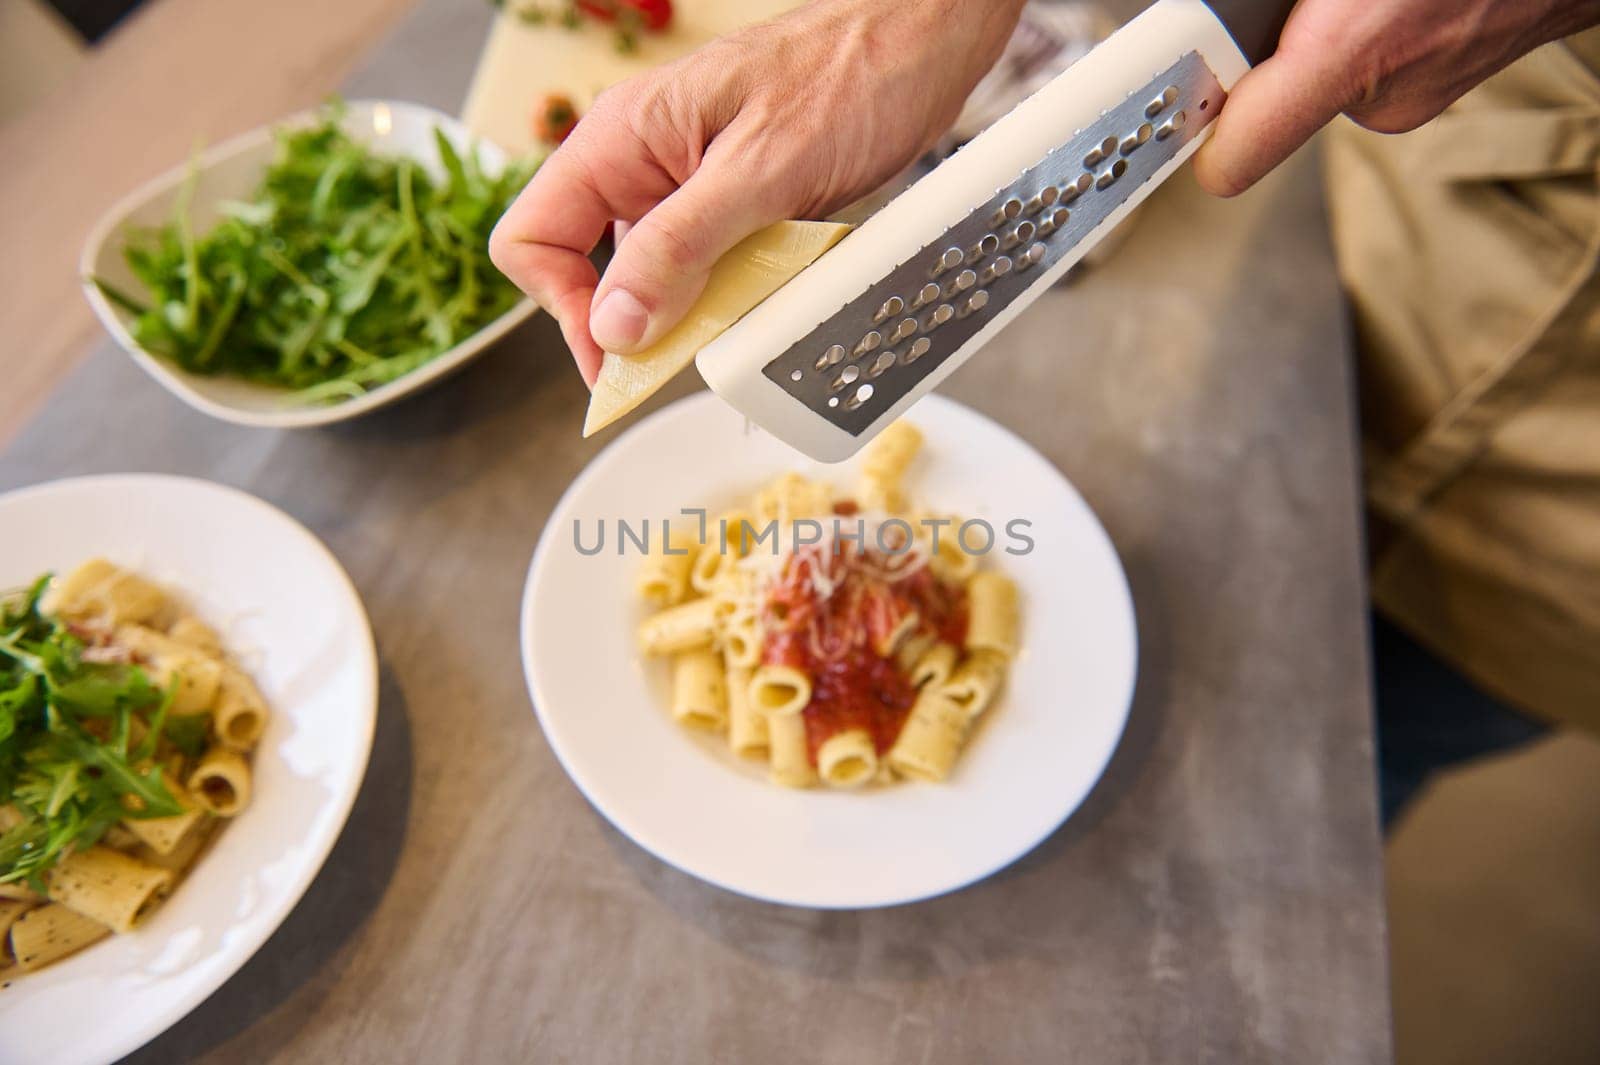 Directly above chef hands using grater, grating cheese on freshly cooked pasta with tomato sauce, seasoning and plating up the meal before serving it. Italian cuisine. Culinary. Food background